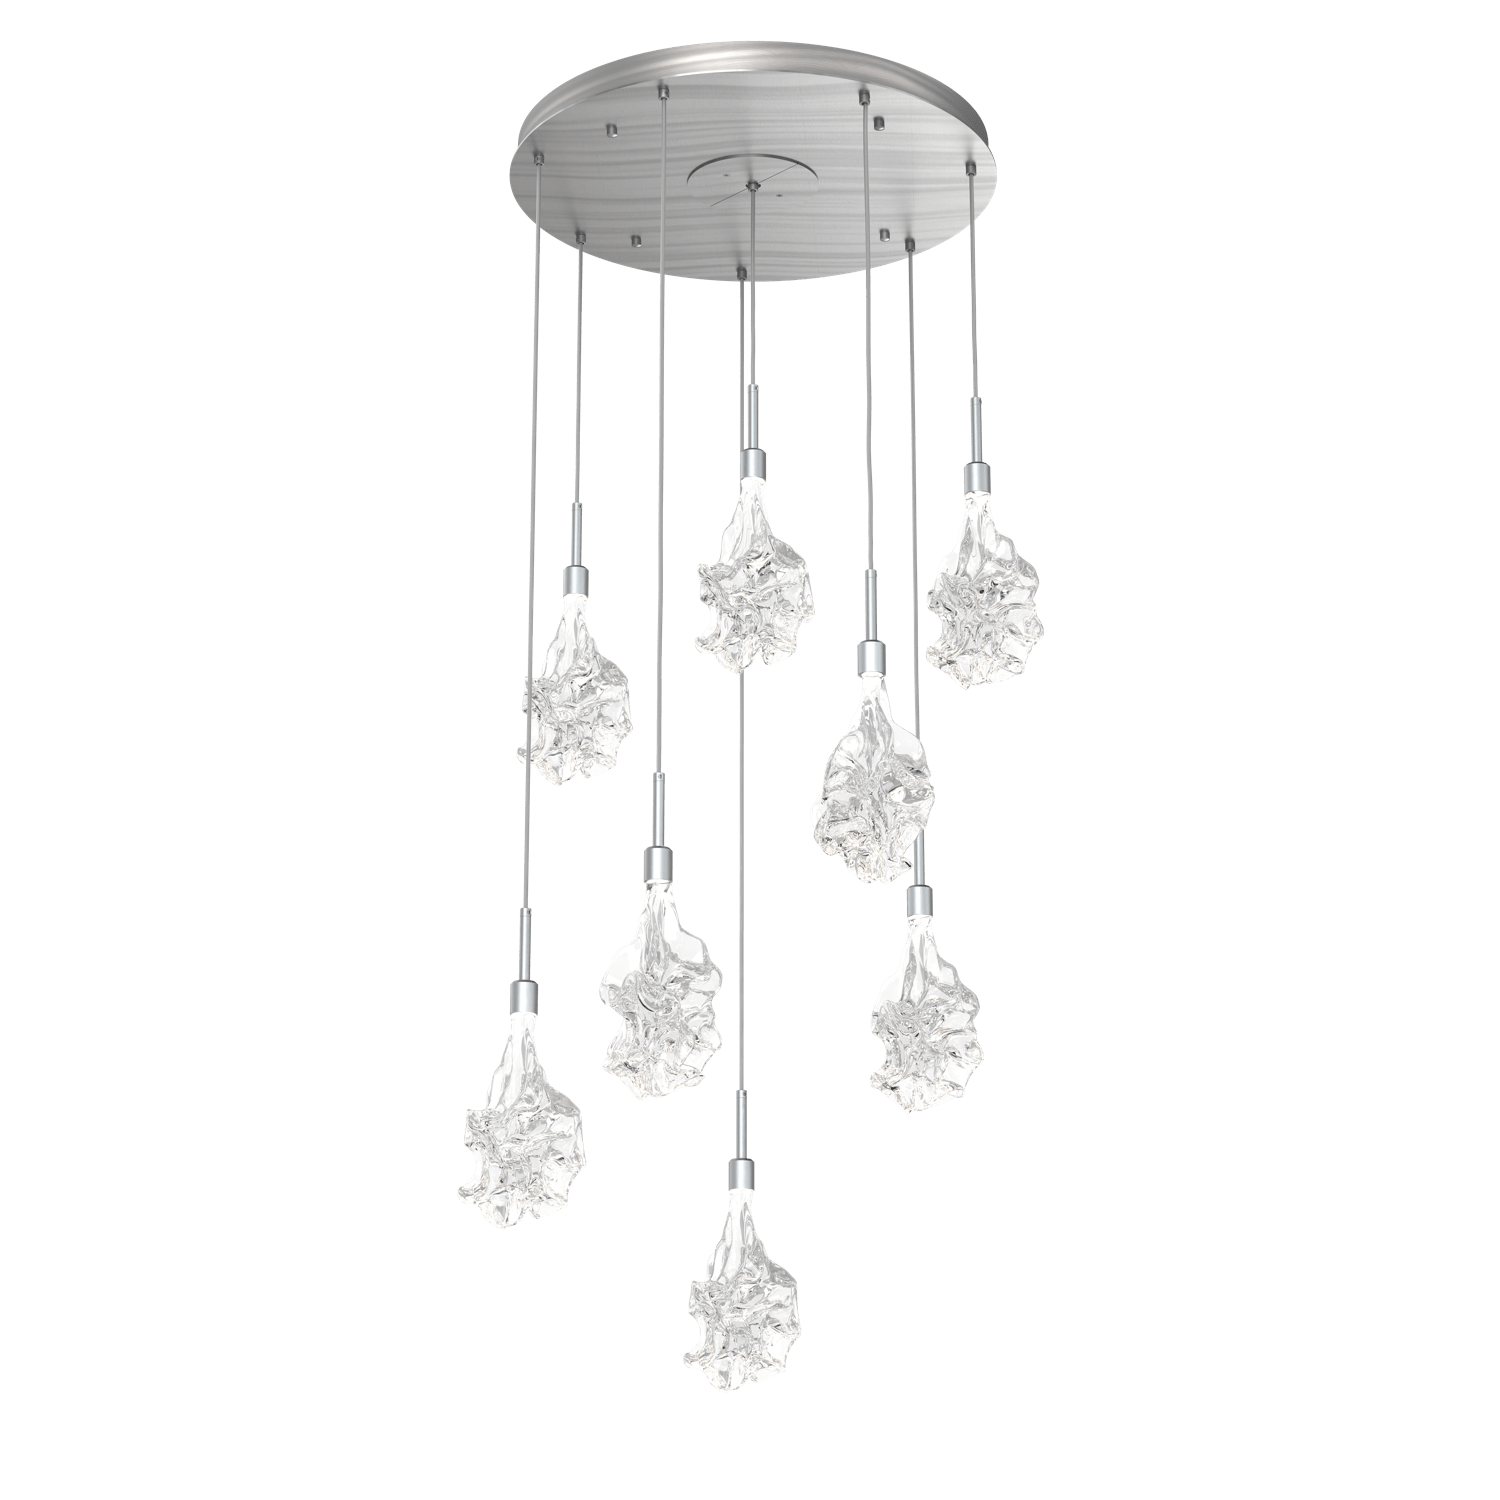 CHB0059-08-SN-Hammerton-Studio-Blossom-8-light-round-pendant-chandelier-with-satin-nickel-finish-and-clear-handblown-crystal-glass-shades-and-LED-lamping